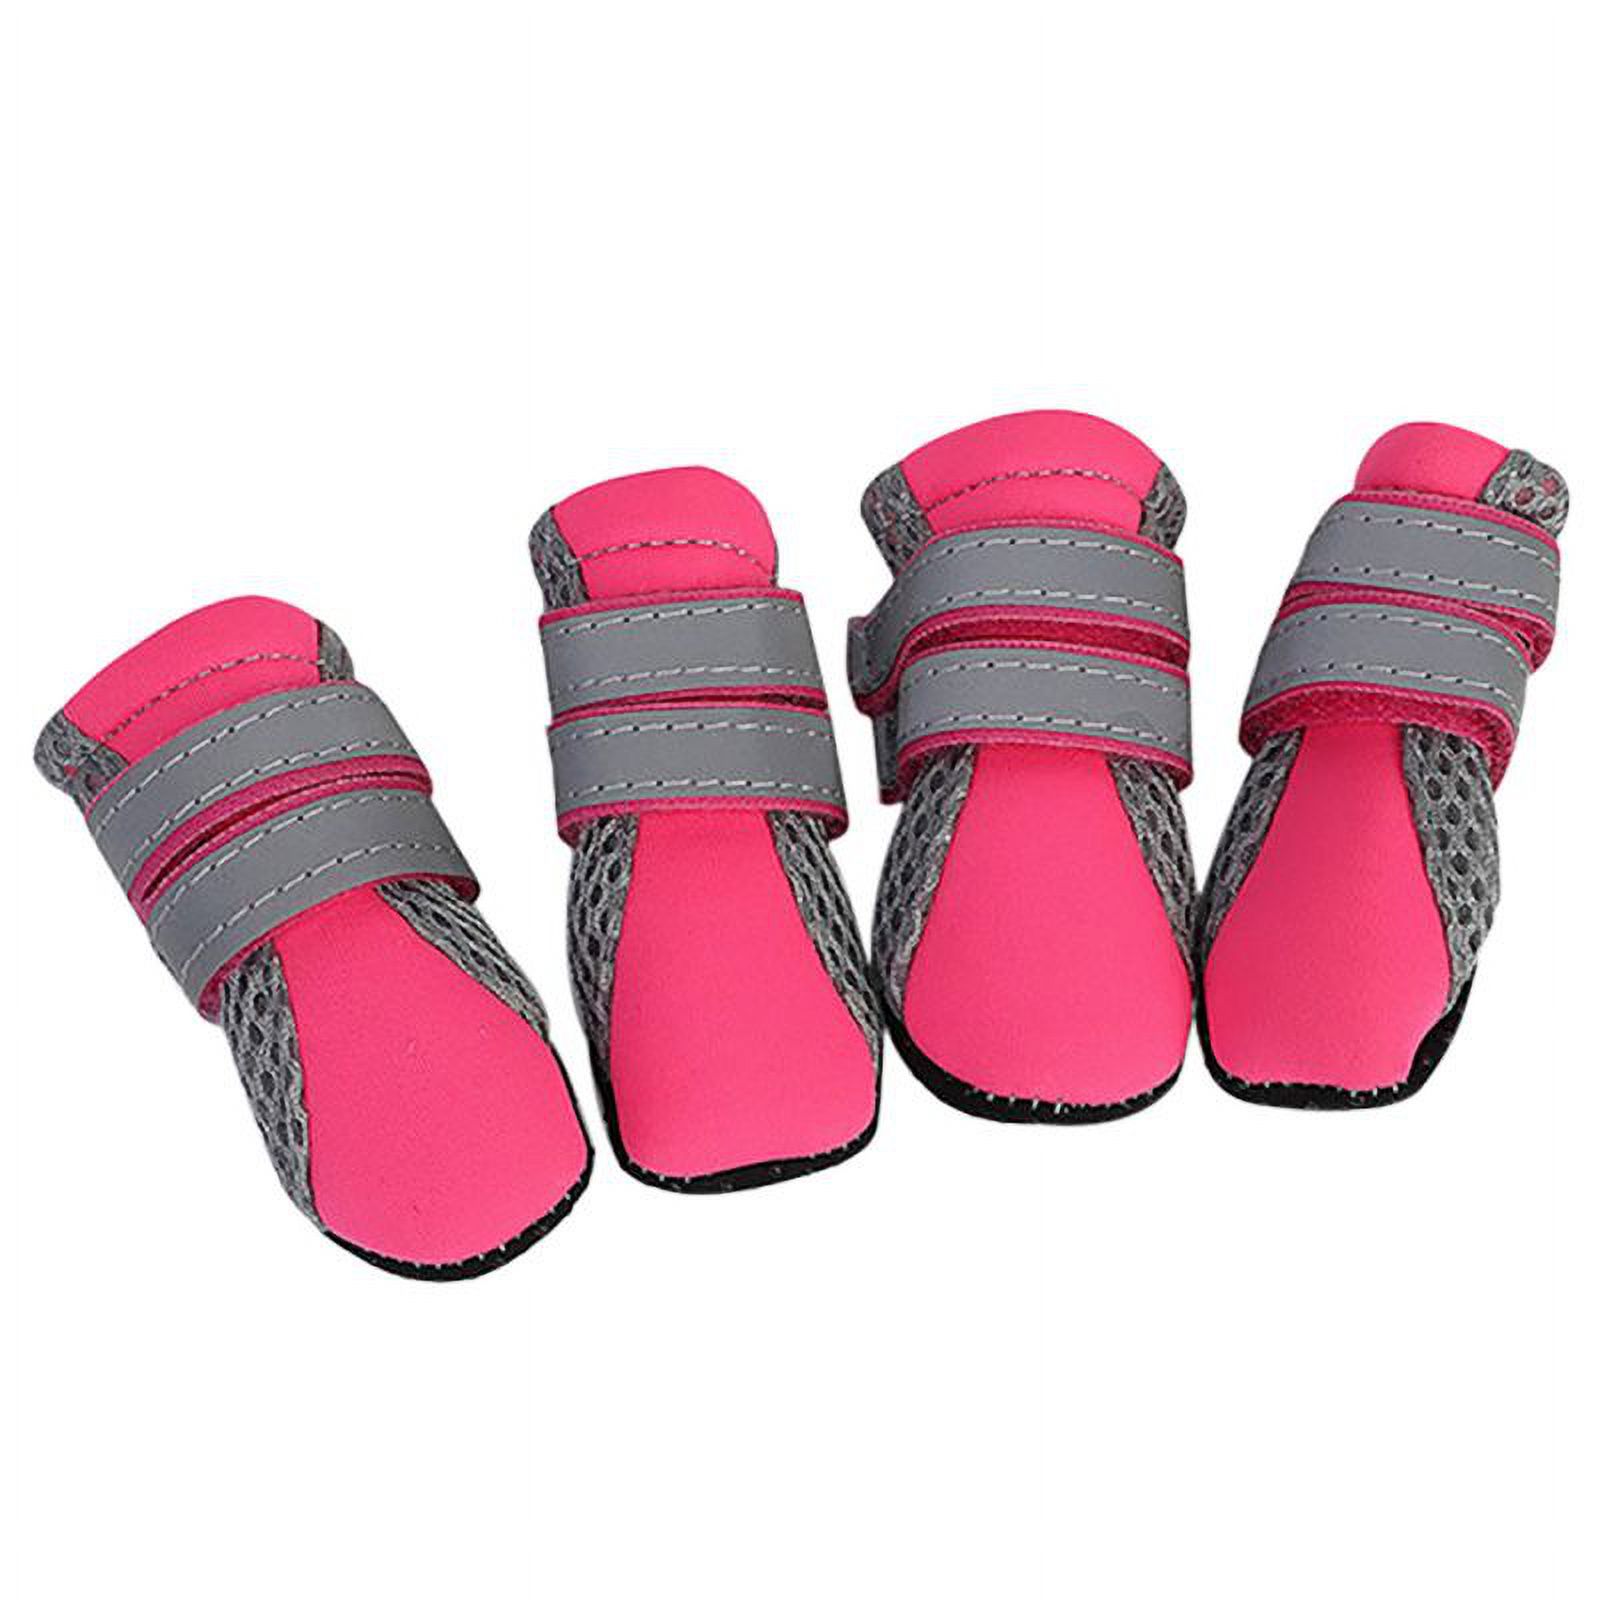 4 Pcs Waterproof Dogs Boots Anti-Slip Sole Feet Cover Paw Protectors Shoes - image 2 of 2